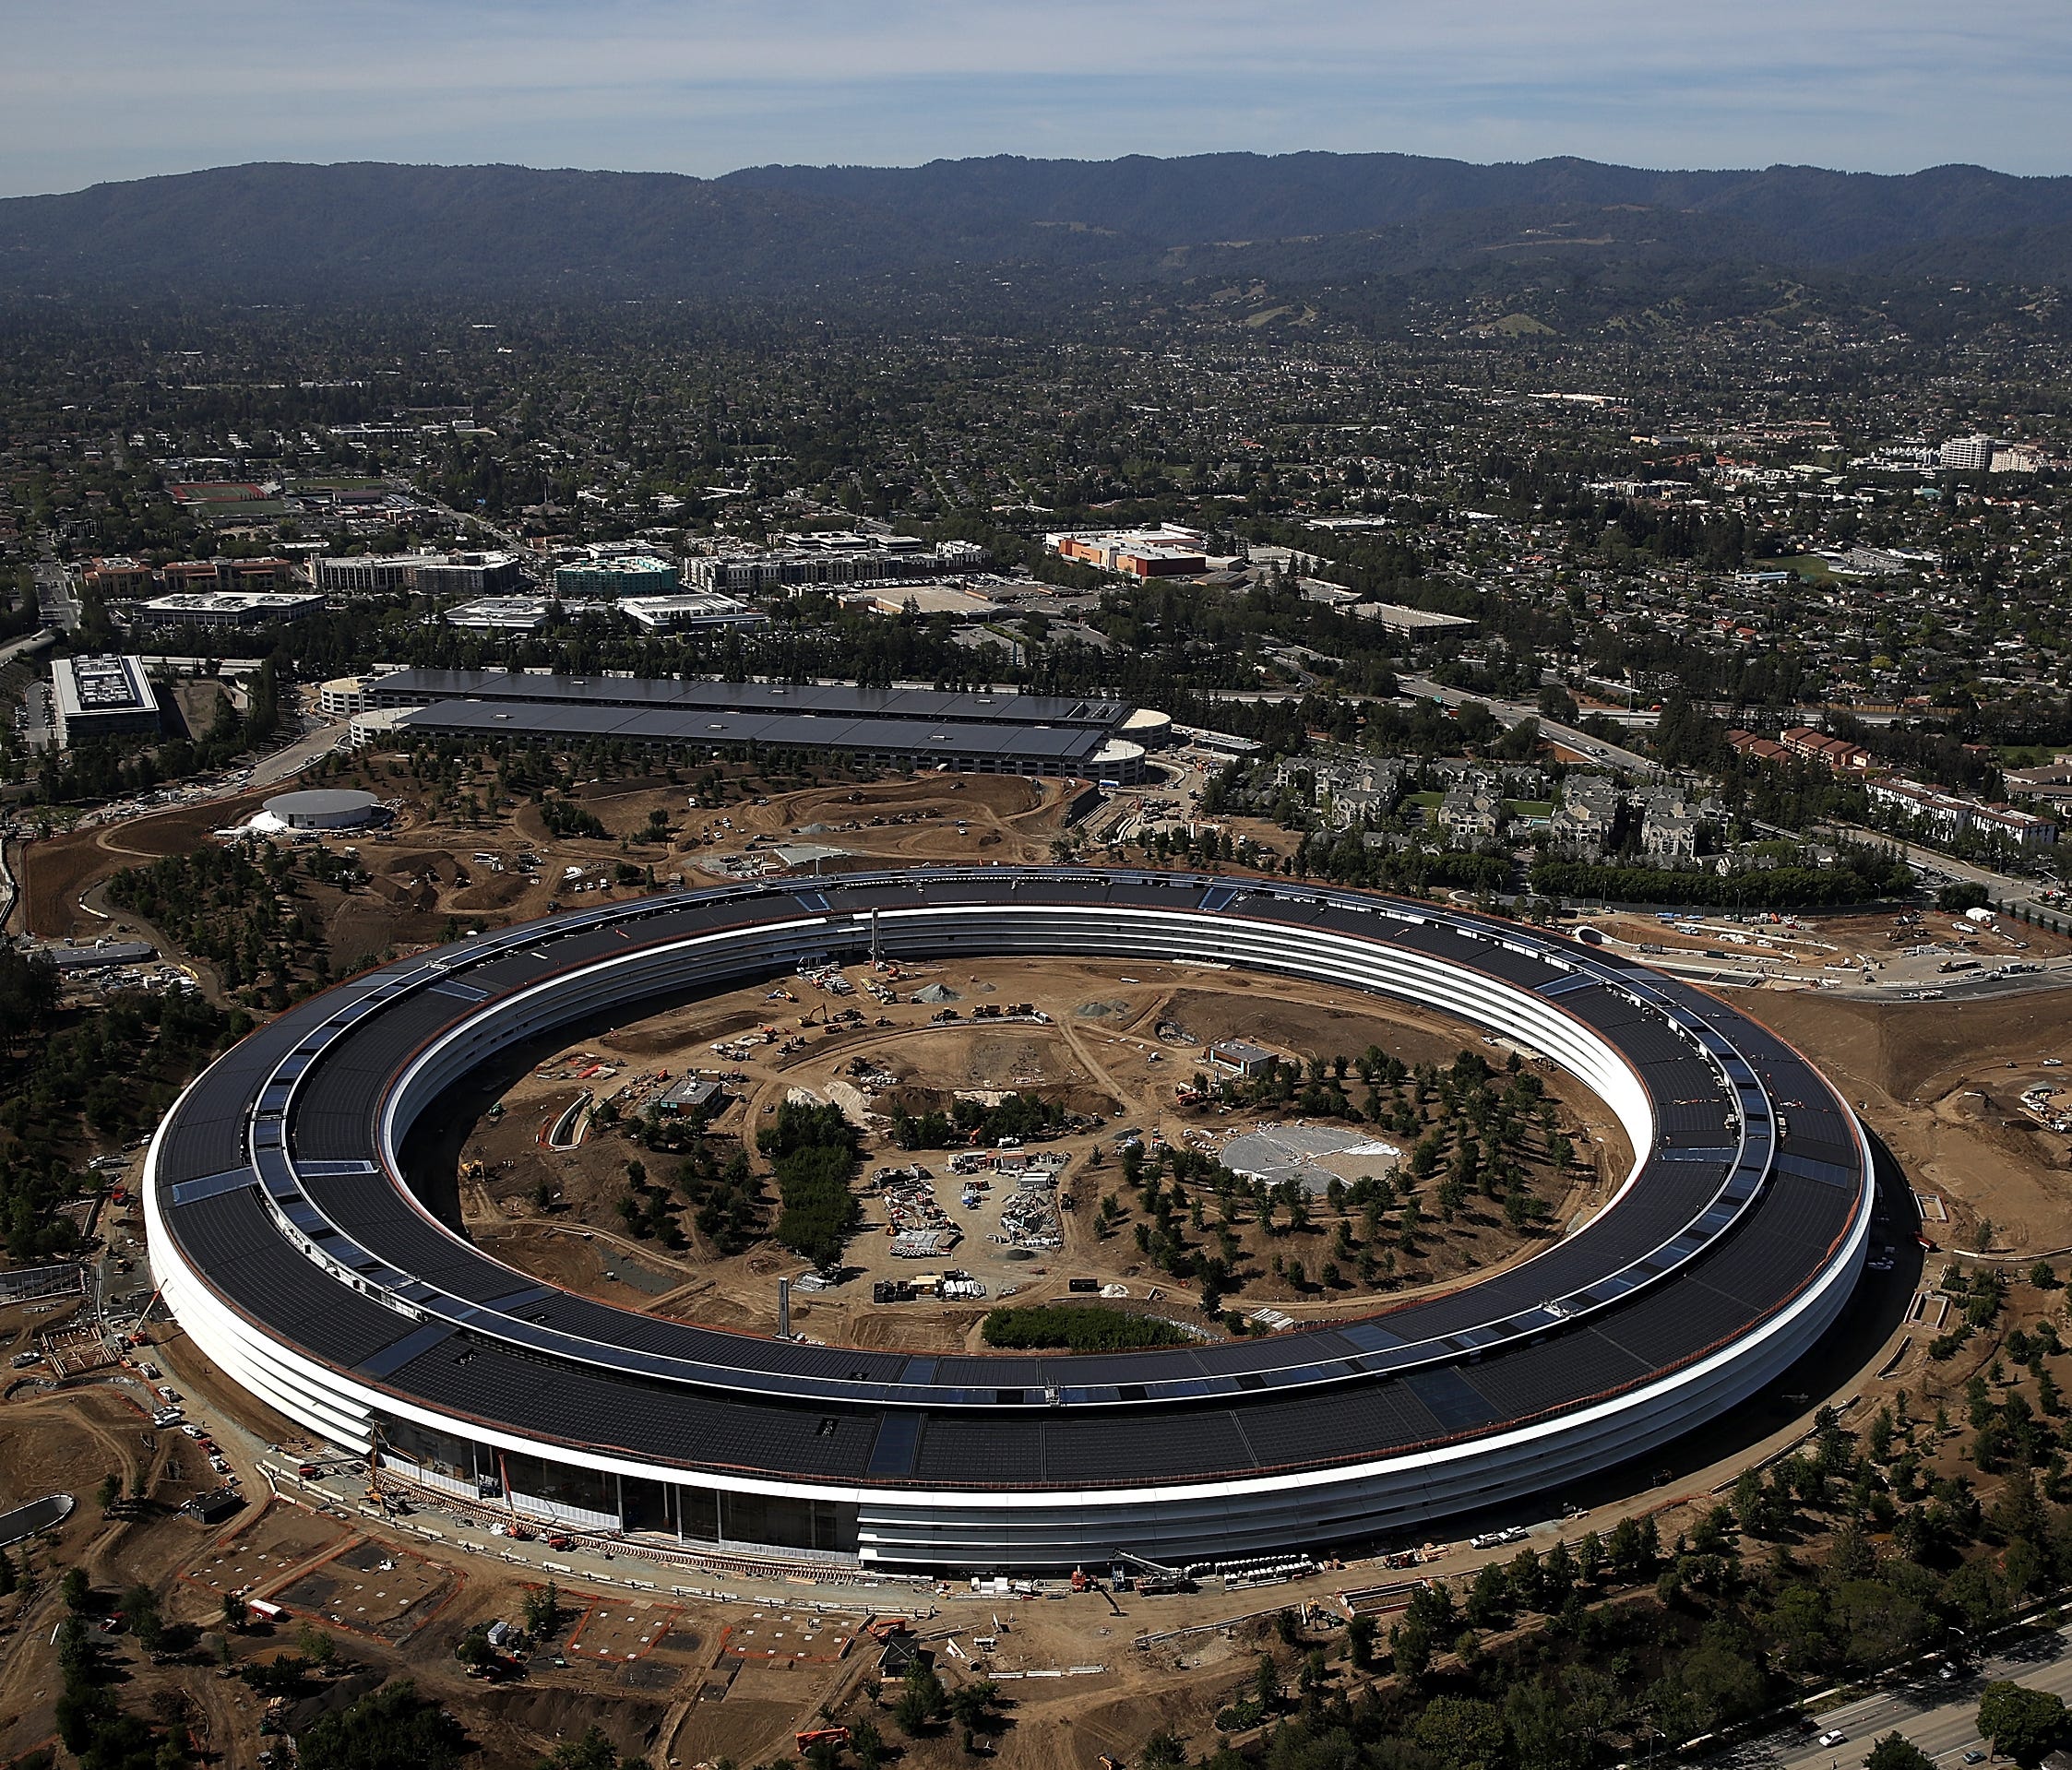 An aerial view of the new Apple headquarters on April 28, 2017 in Cupertino, California. Apple's new 175-acre 'spaceship' campus dubbed 'Apple Park' is nearing completion and is set to begin moving in Apple employees. The new headquarters, designed b